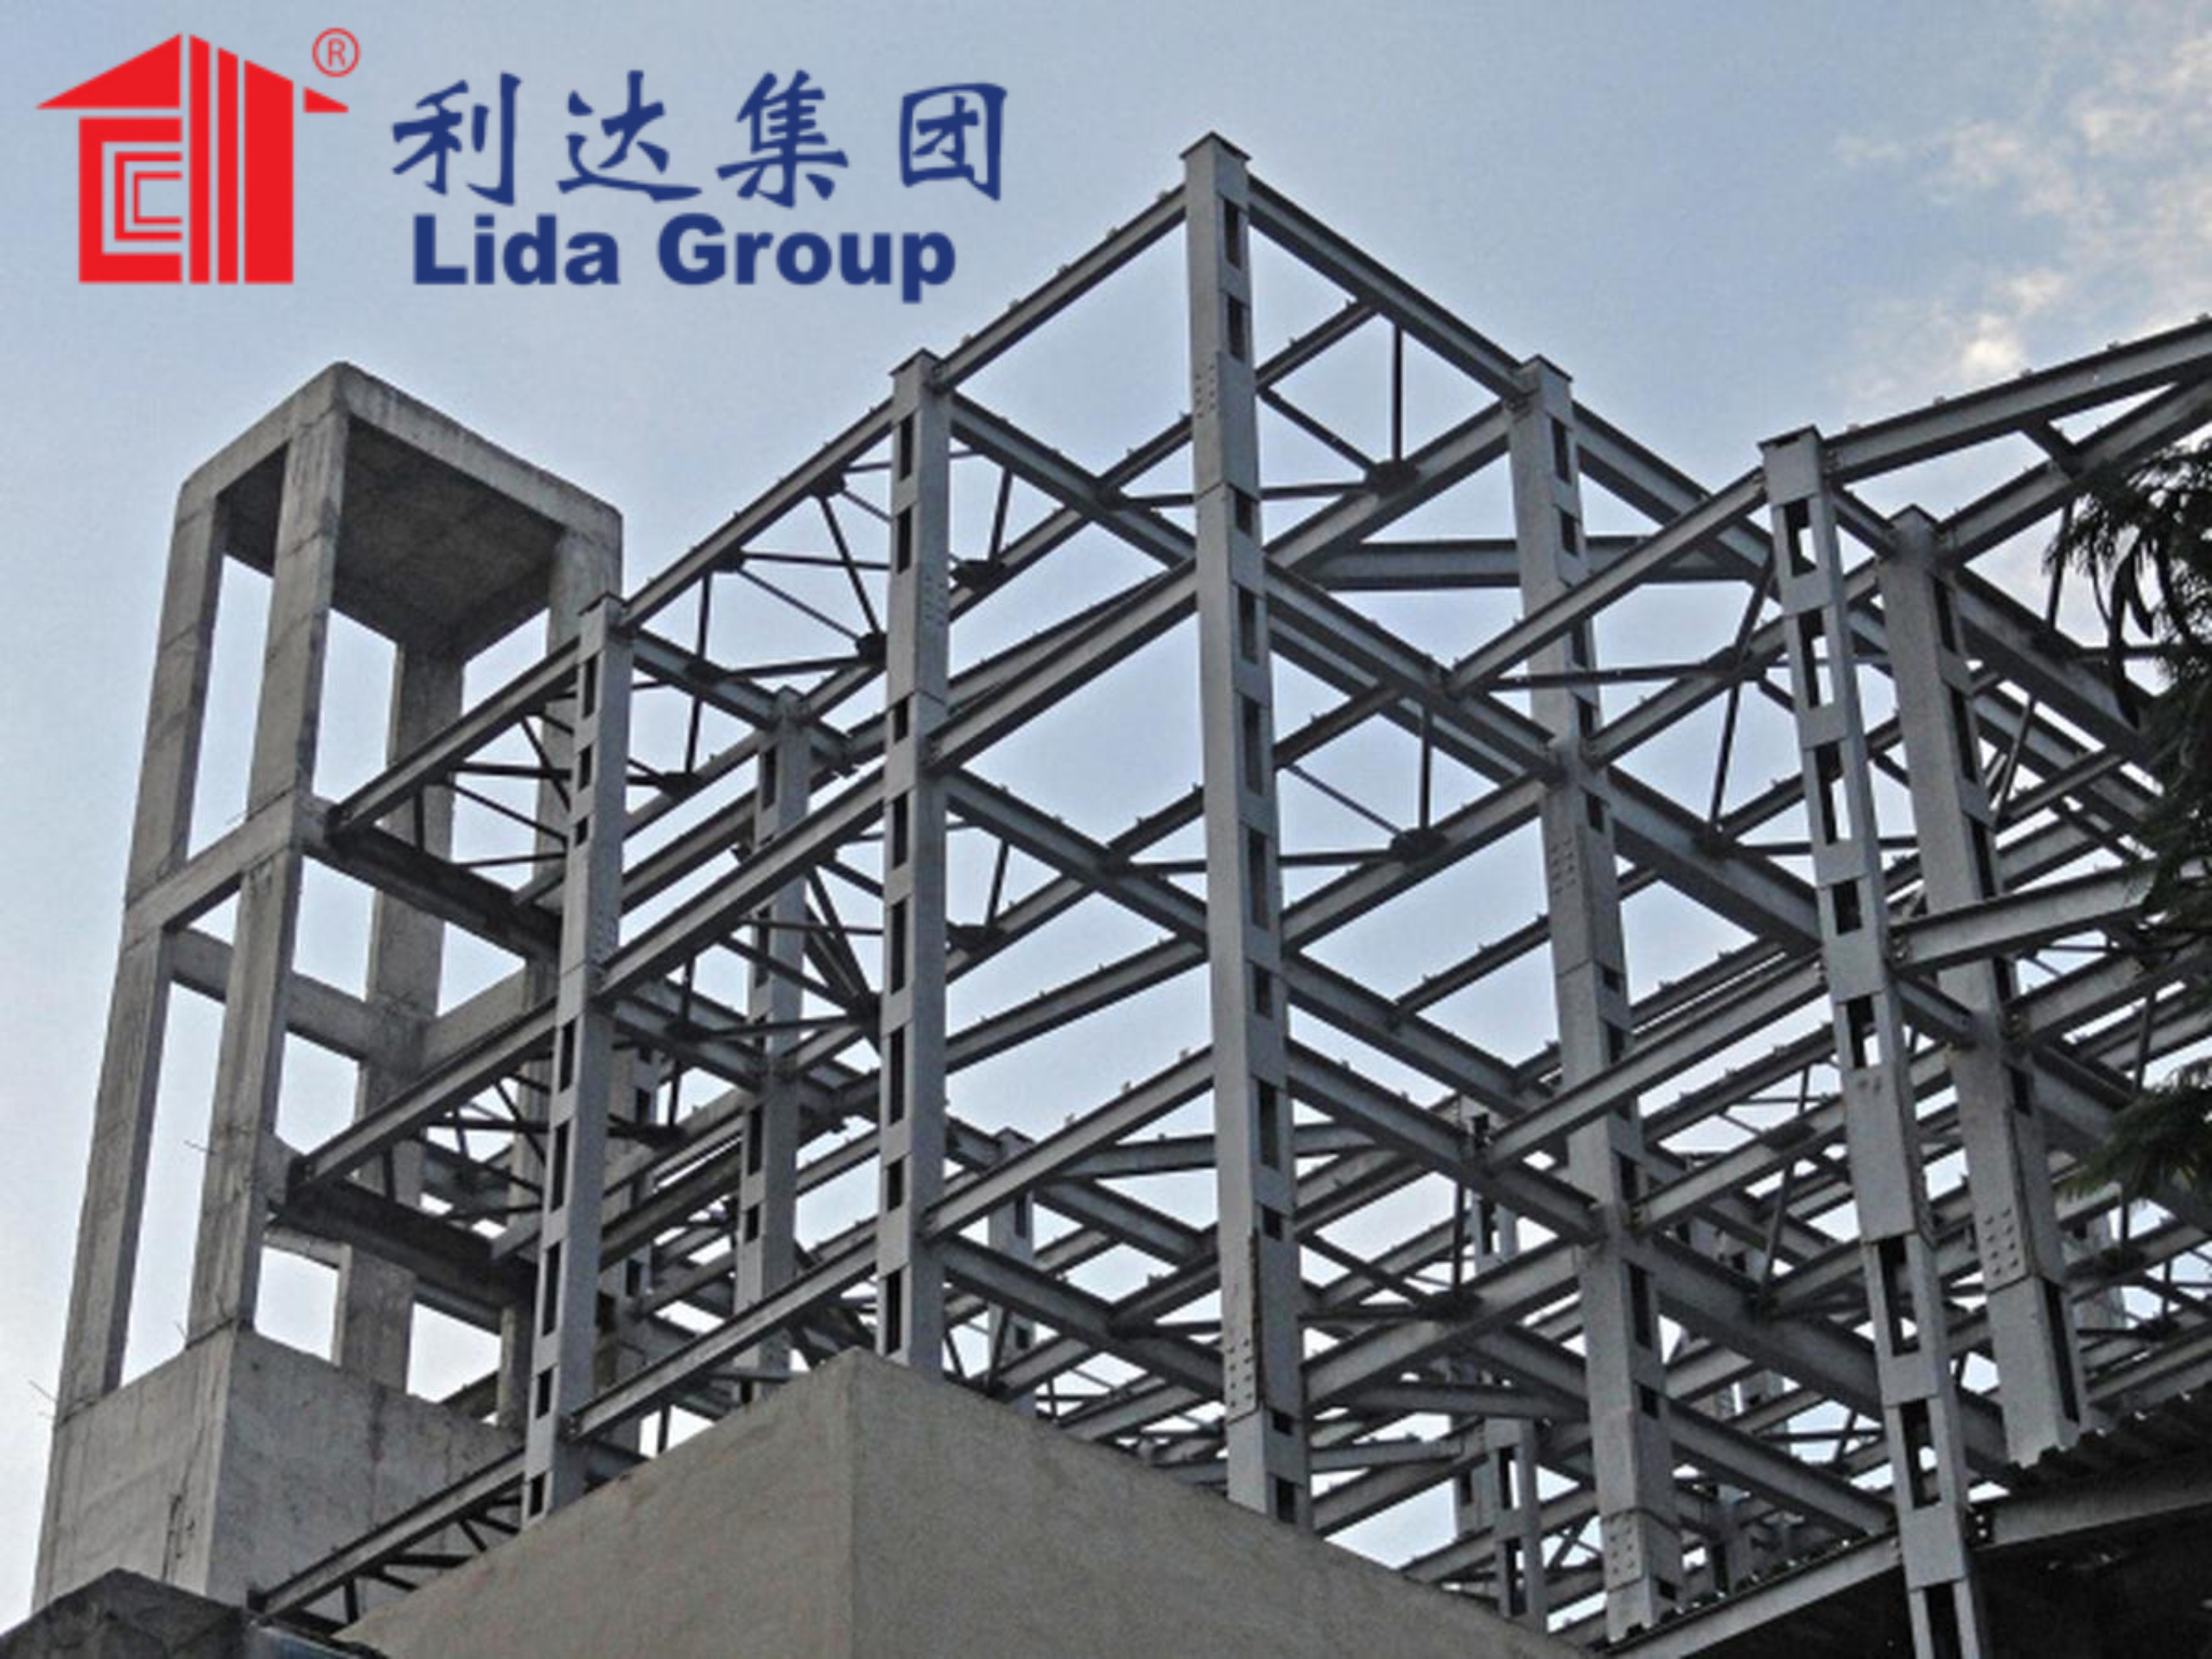 Military Researchers Partner With Lida Group To Develop Deployable Steel Modular Barracks Using galvanized Shipping Containers For Extreme Climate Resistance During Natural Disasters And Conflicts